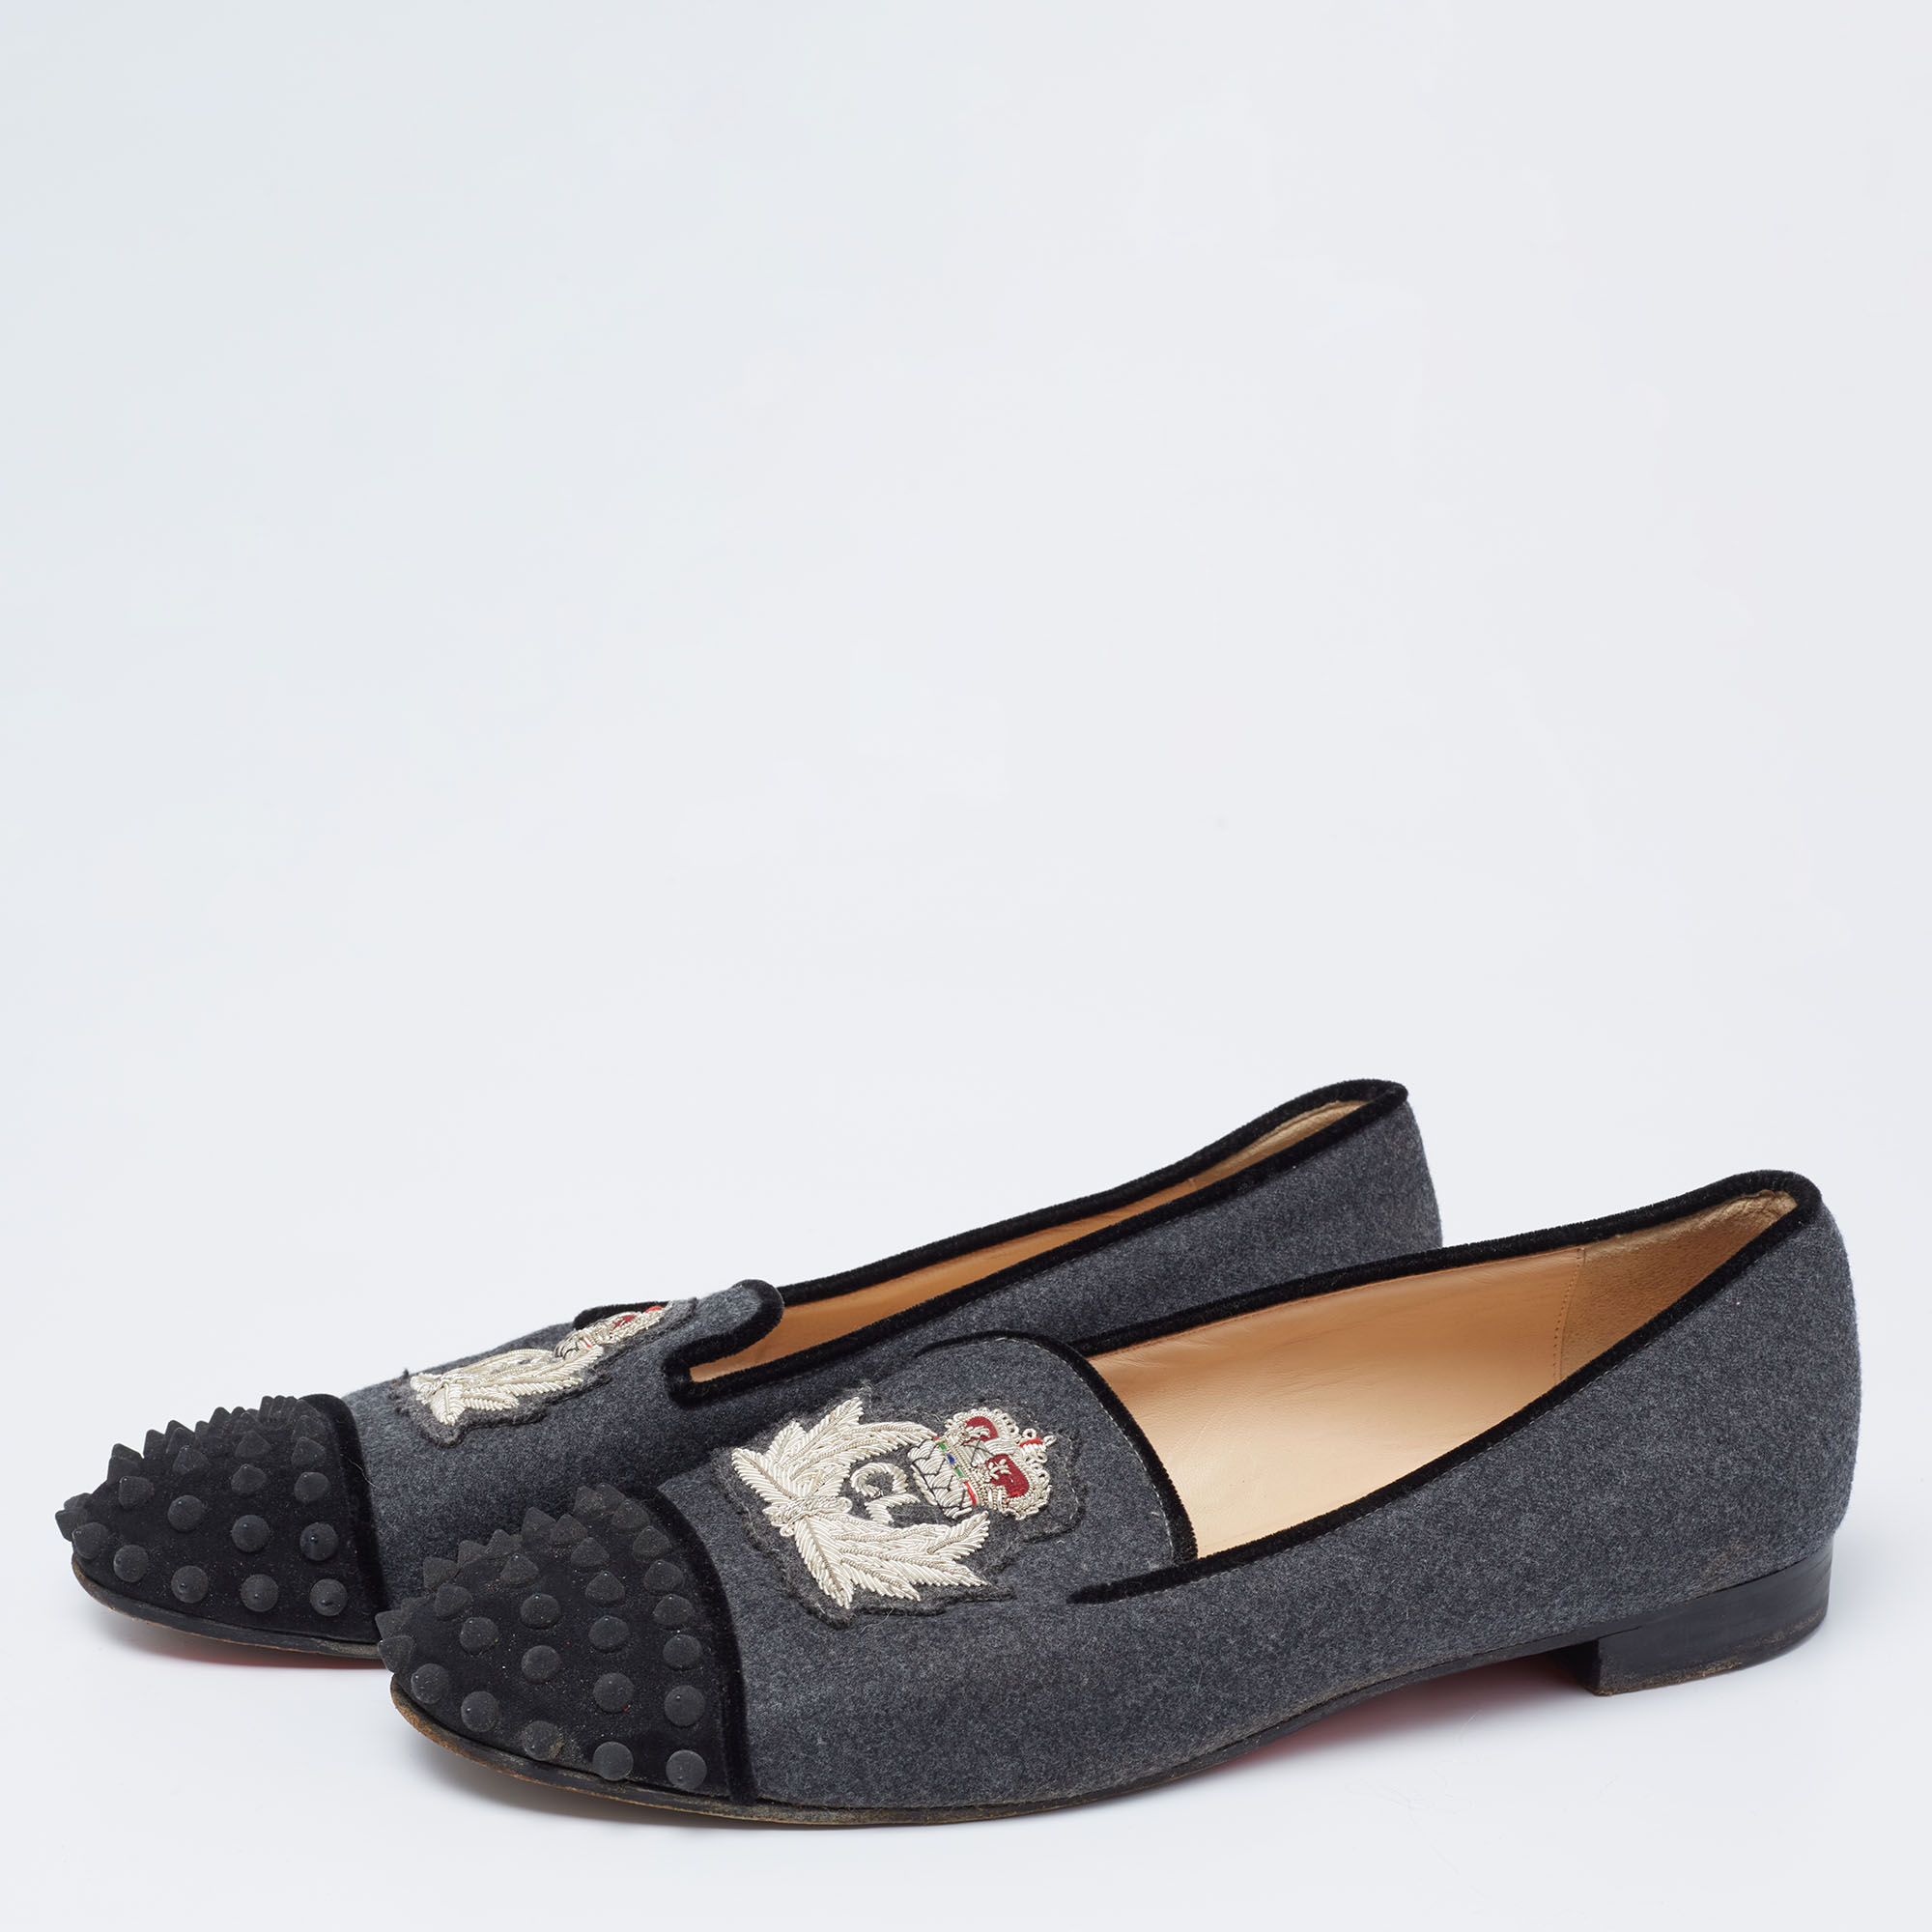 

Christian Louboutin Grey/Black Wool and Suede Harvanana Spiked Cap-Toe Smoking Slippers Size